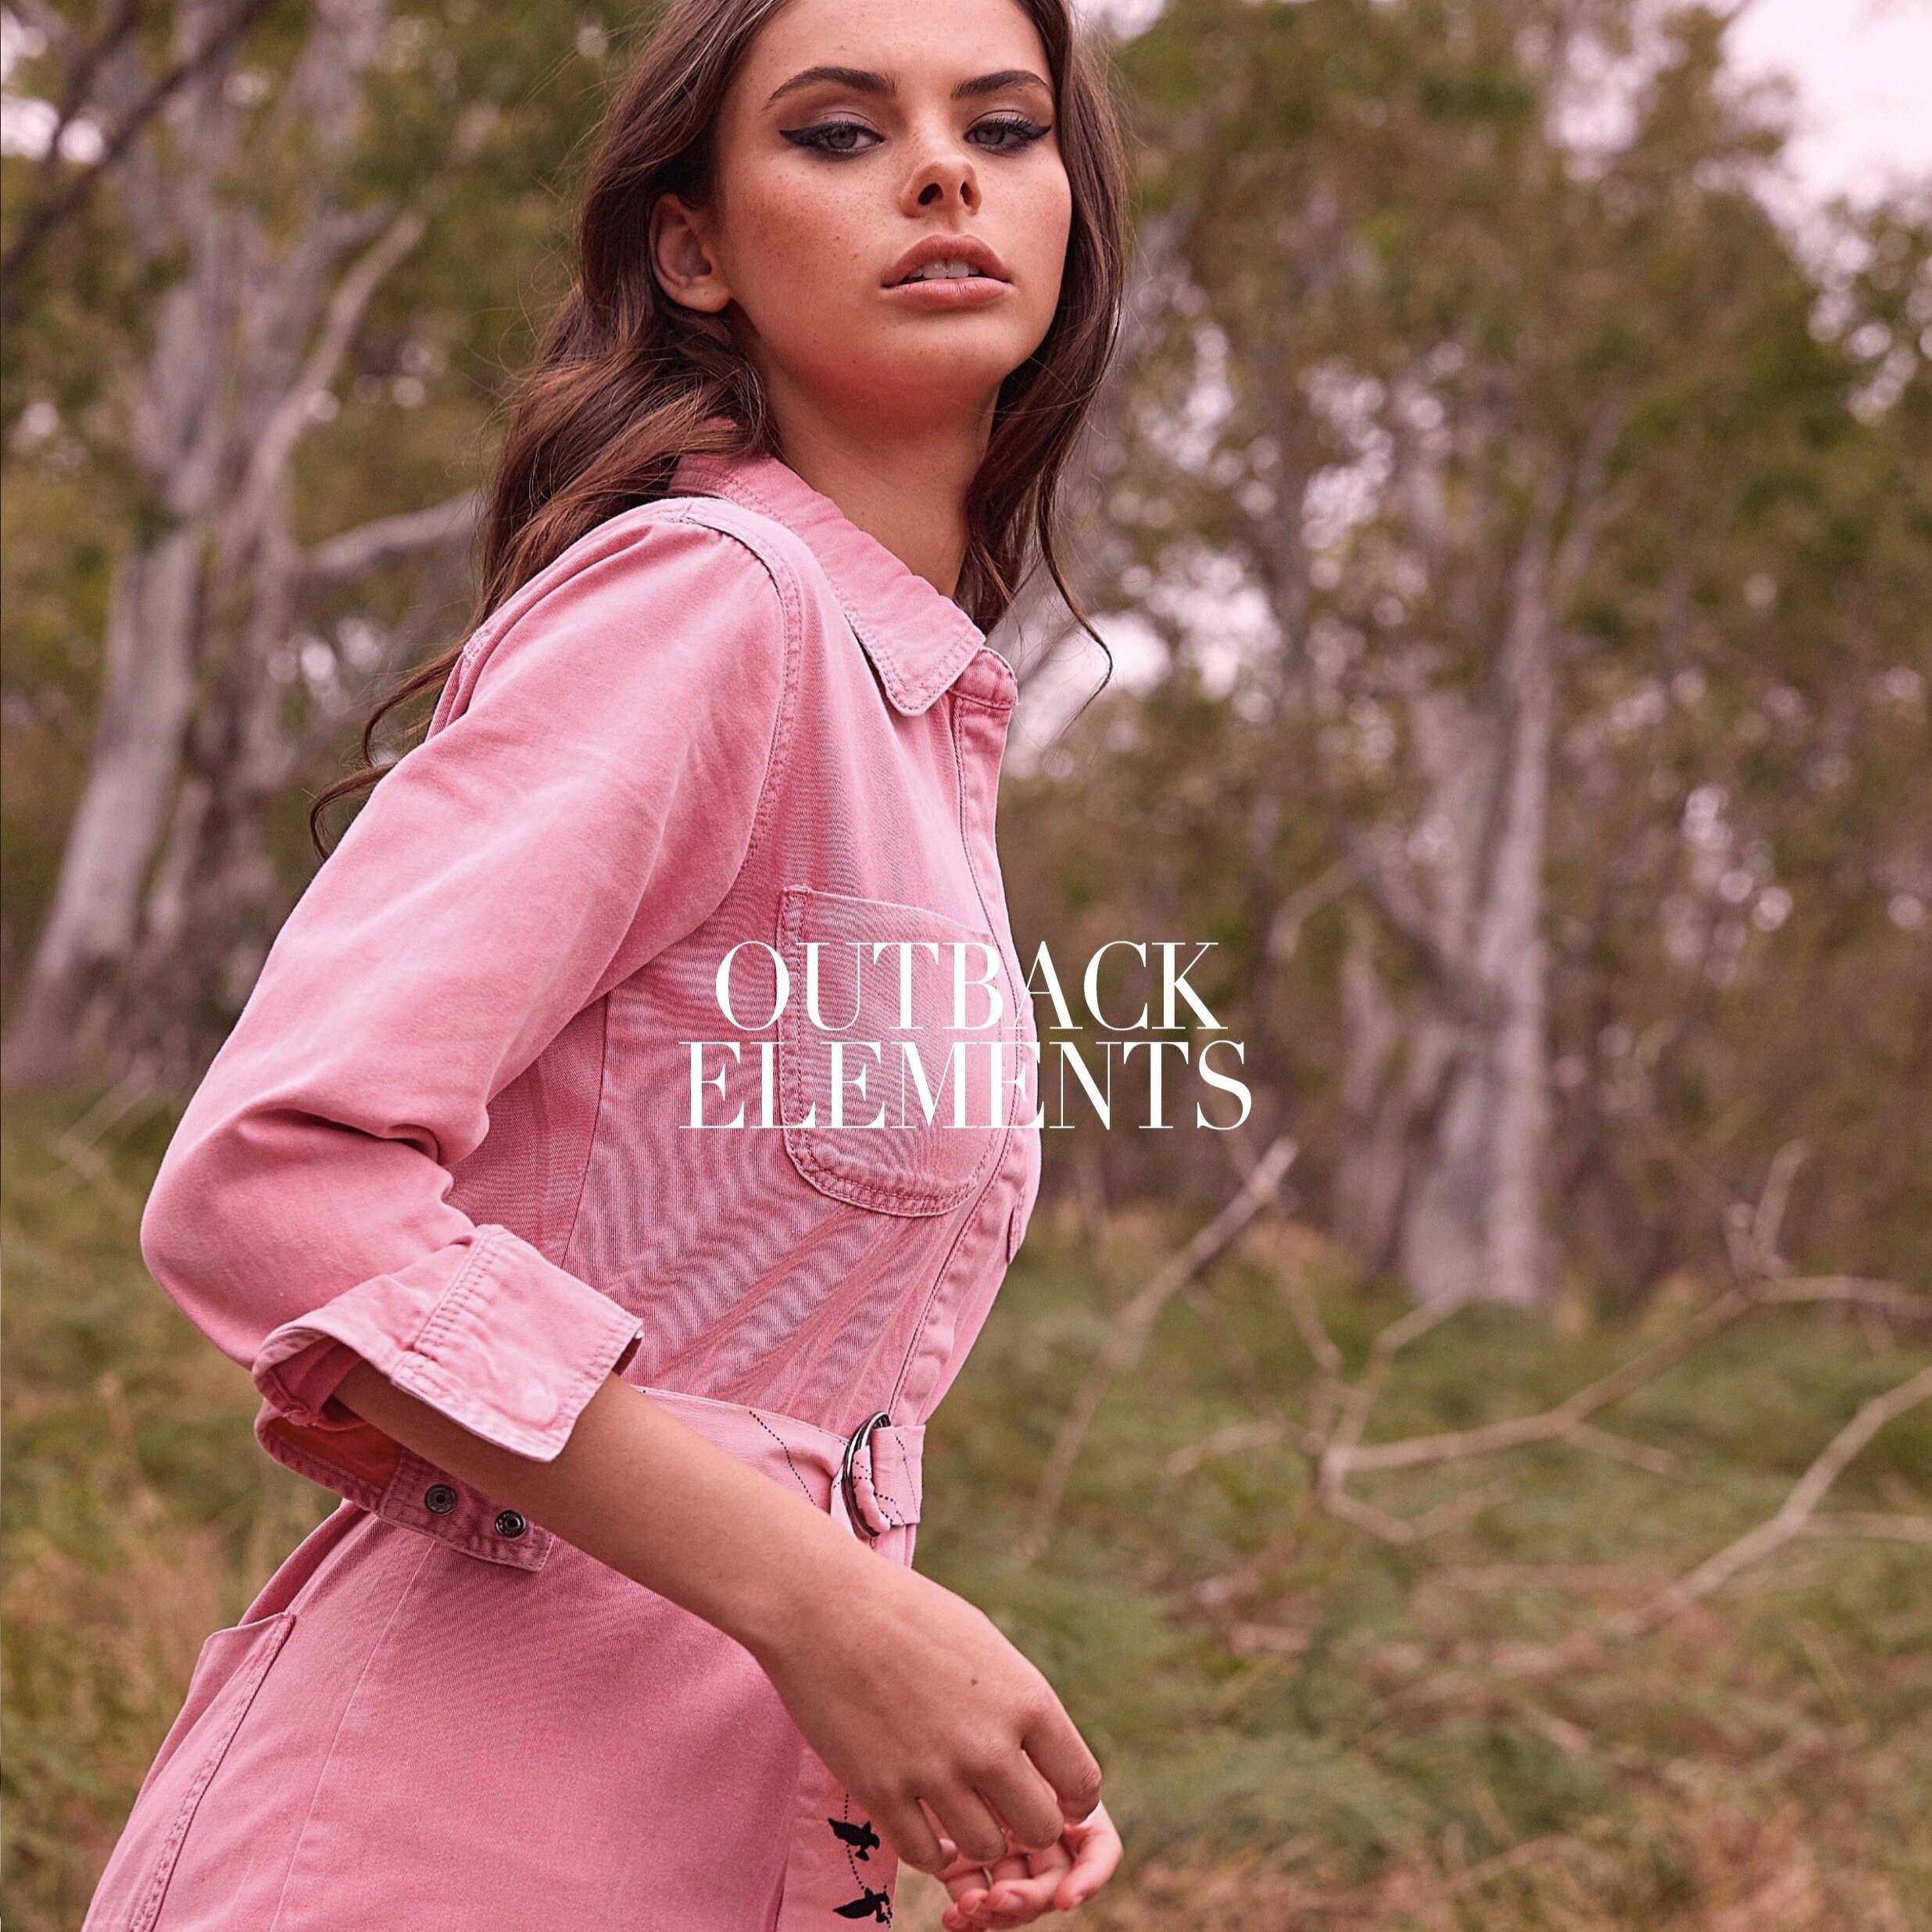 OUTBACK ELEMENTS | FASHION EDITORIAL